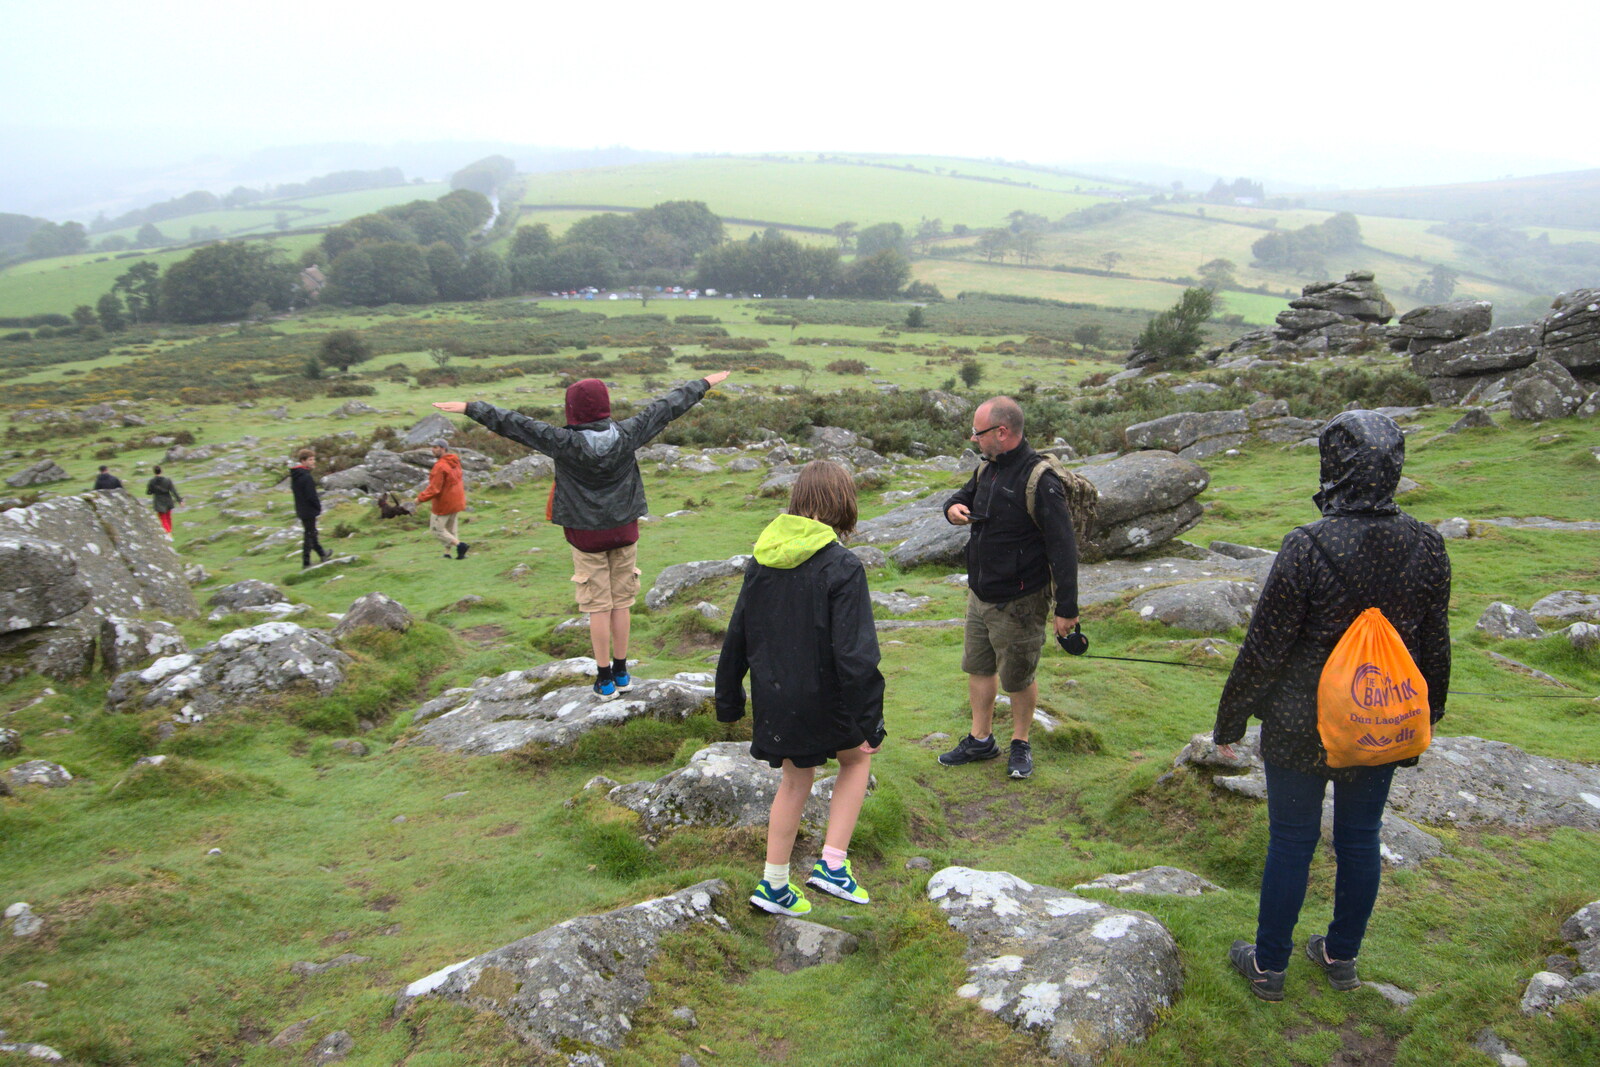 We head back to the car park in the lashing rain from A Walk up Hound Tor, Dartmoor, Devon - 24th August 2020